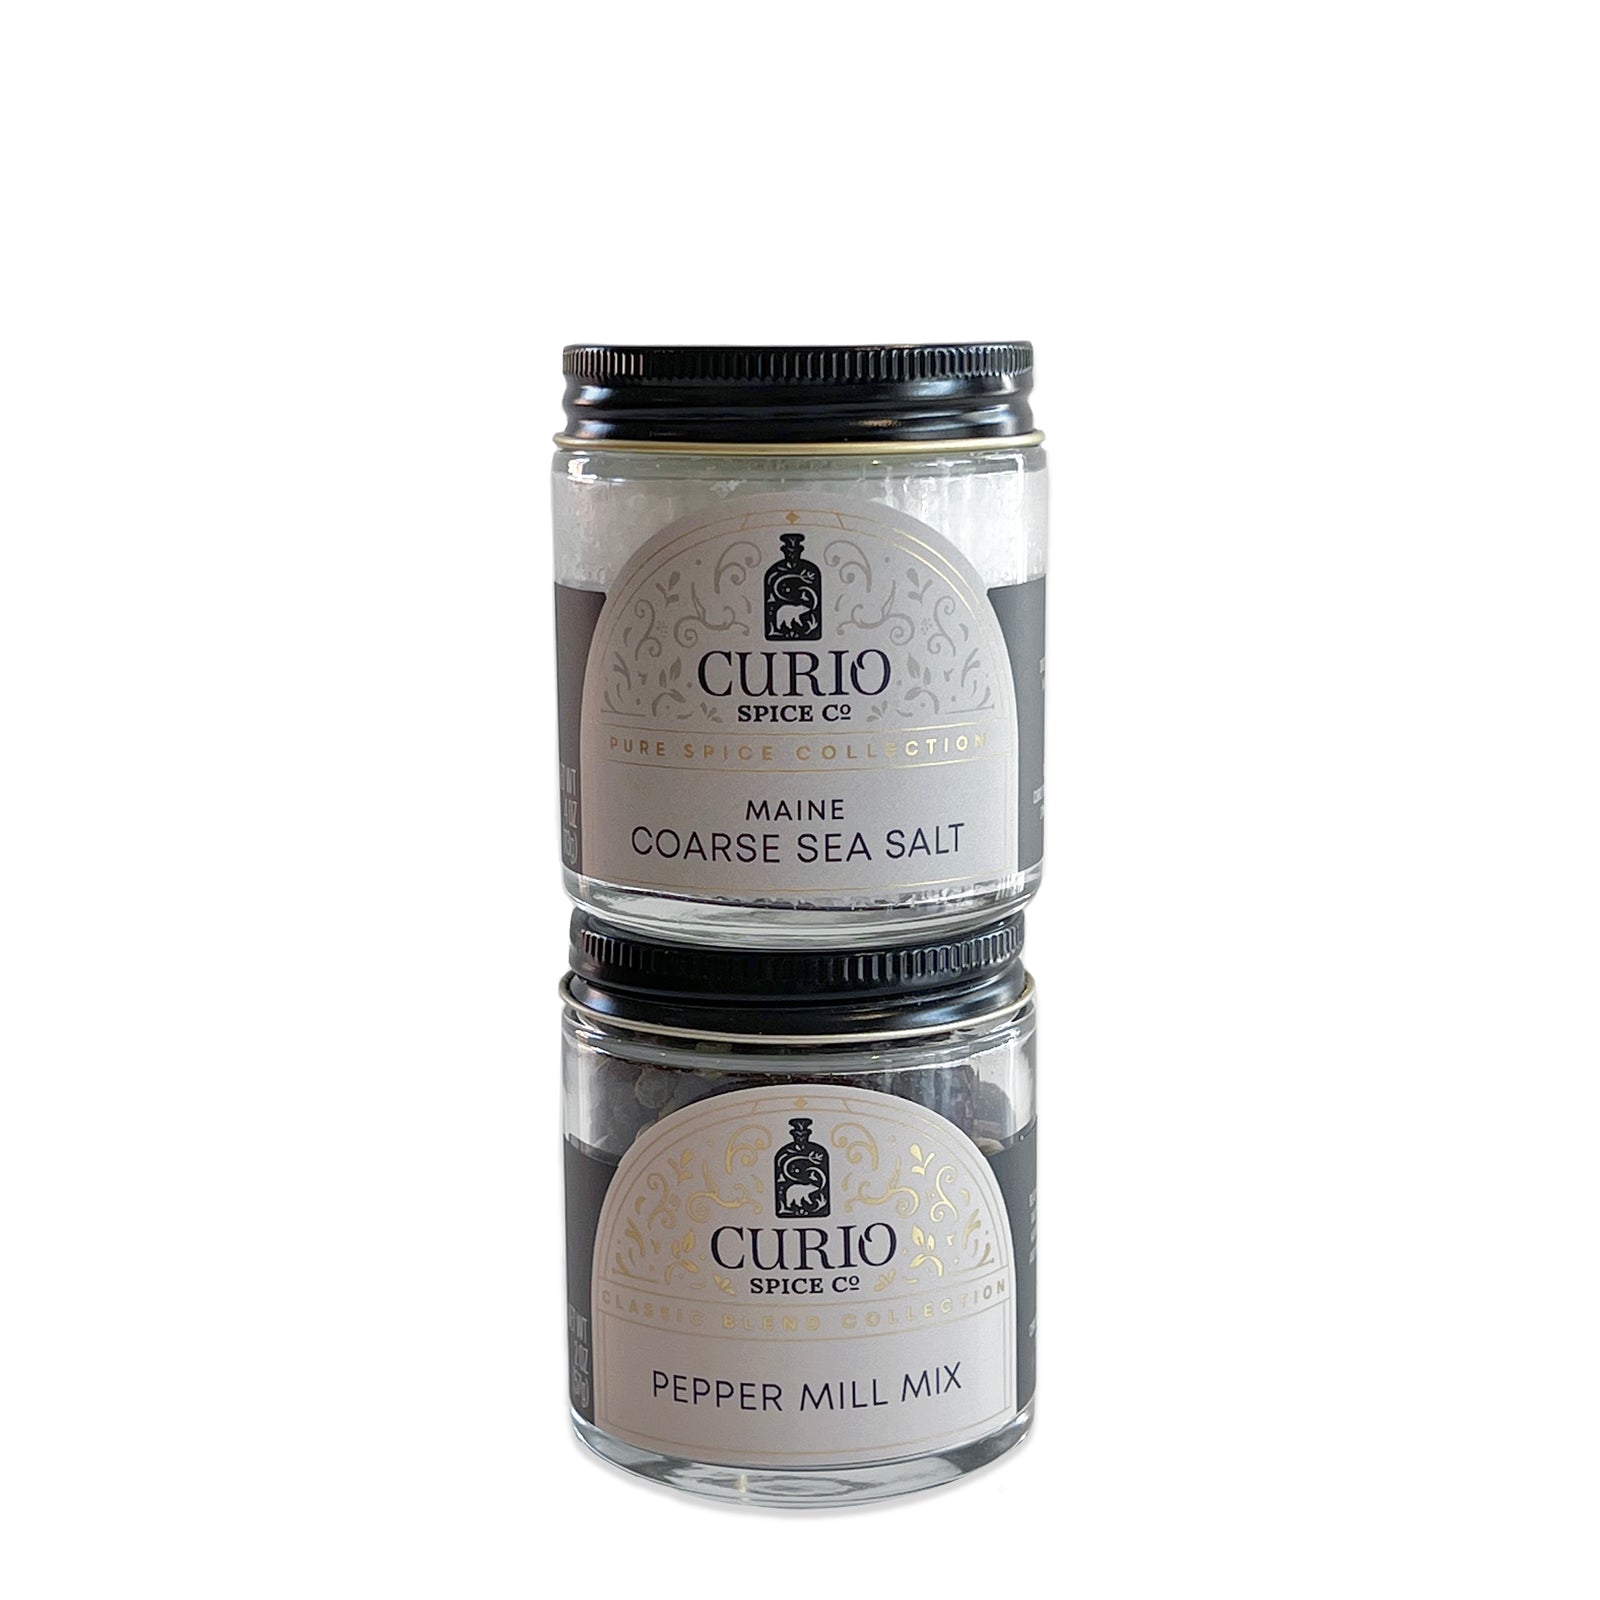 Curio Spice Company Pepper Mill Mix Pantry Pack Bag (3 oz)